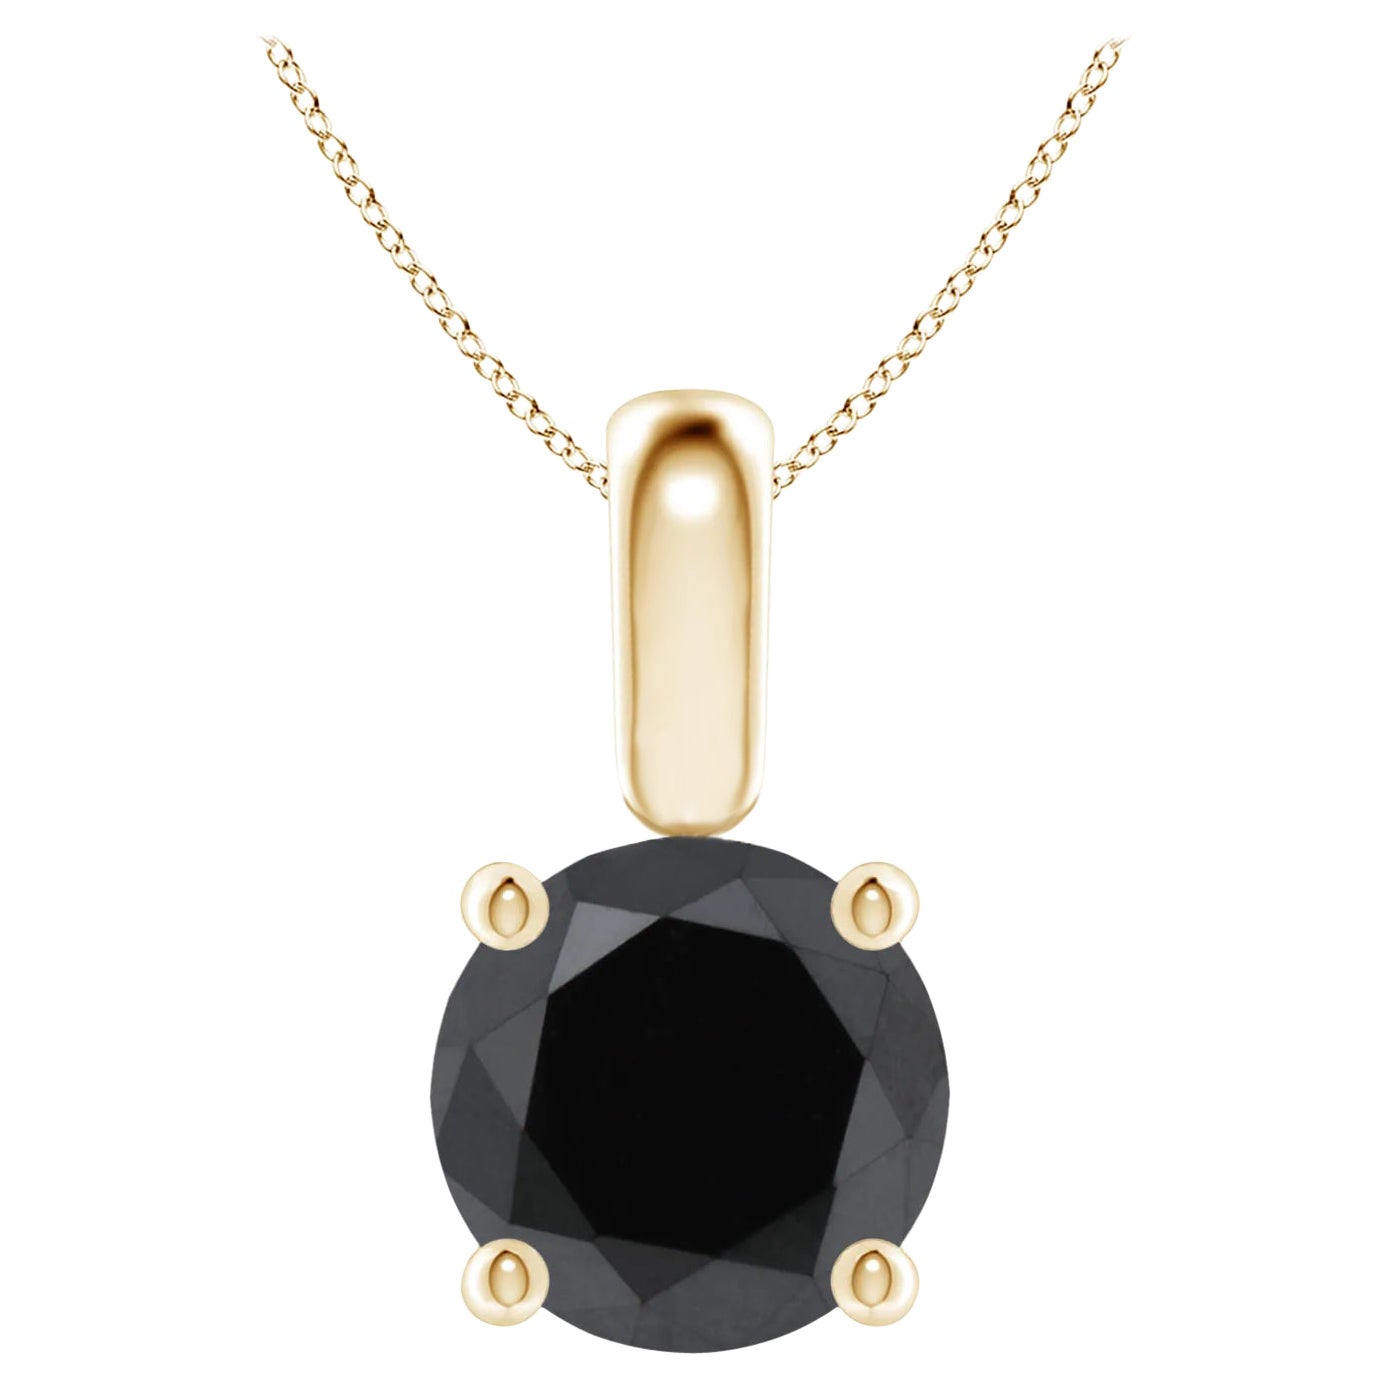 1.58 Carat Round Black Diamond Solitaire Pendant Necklace in 14K Yellow Gold